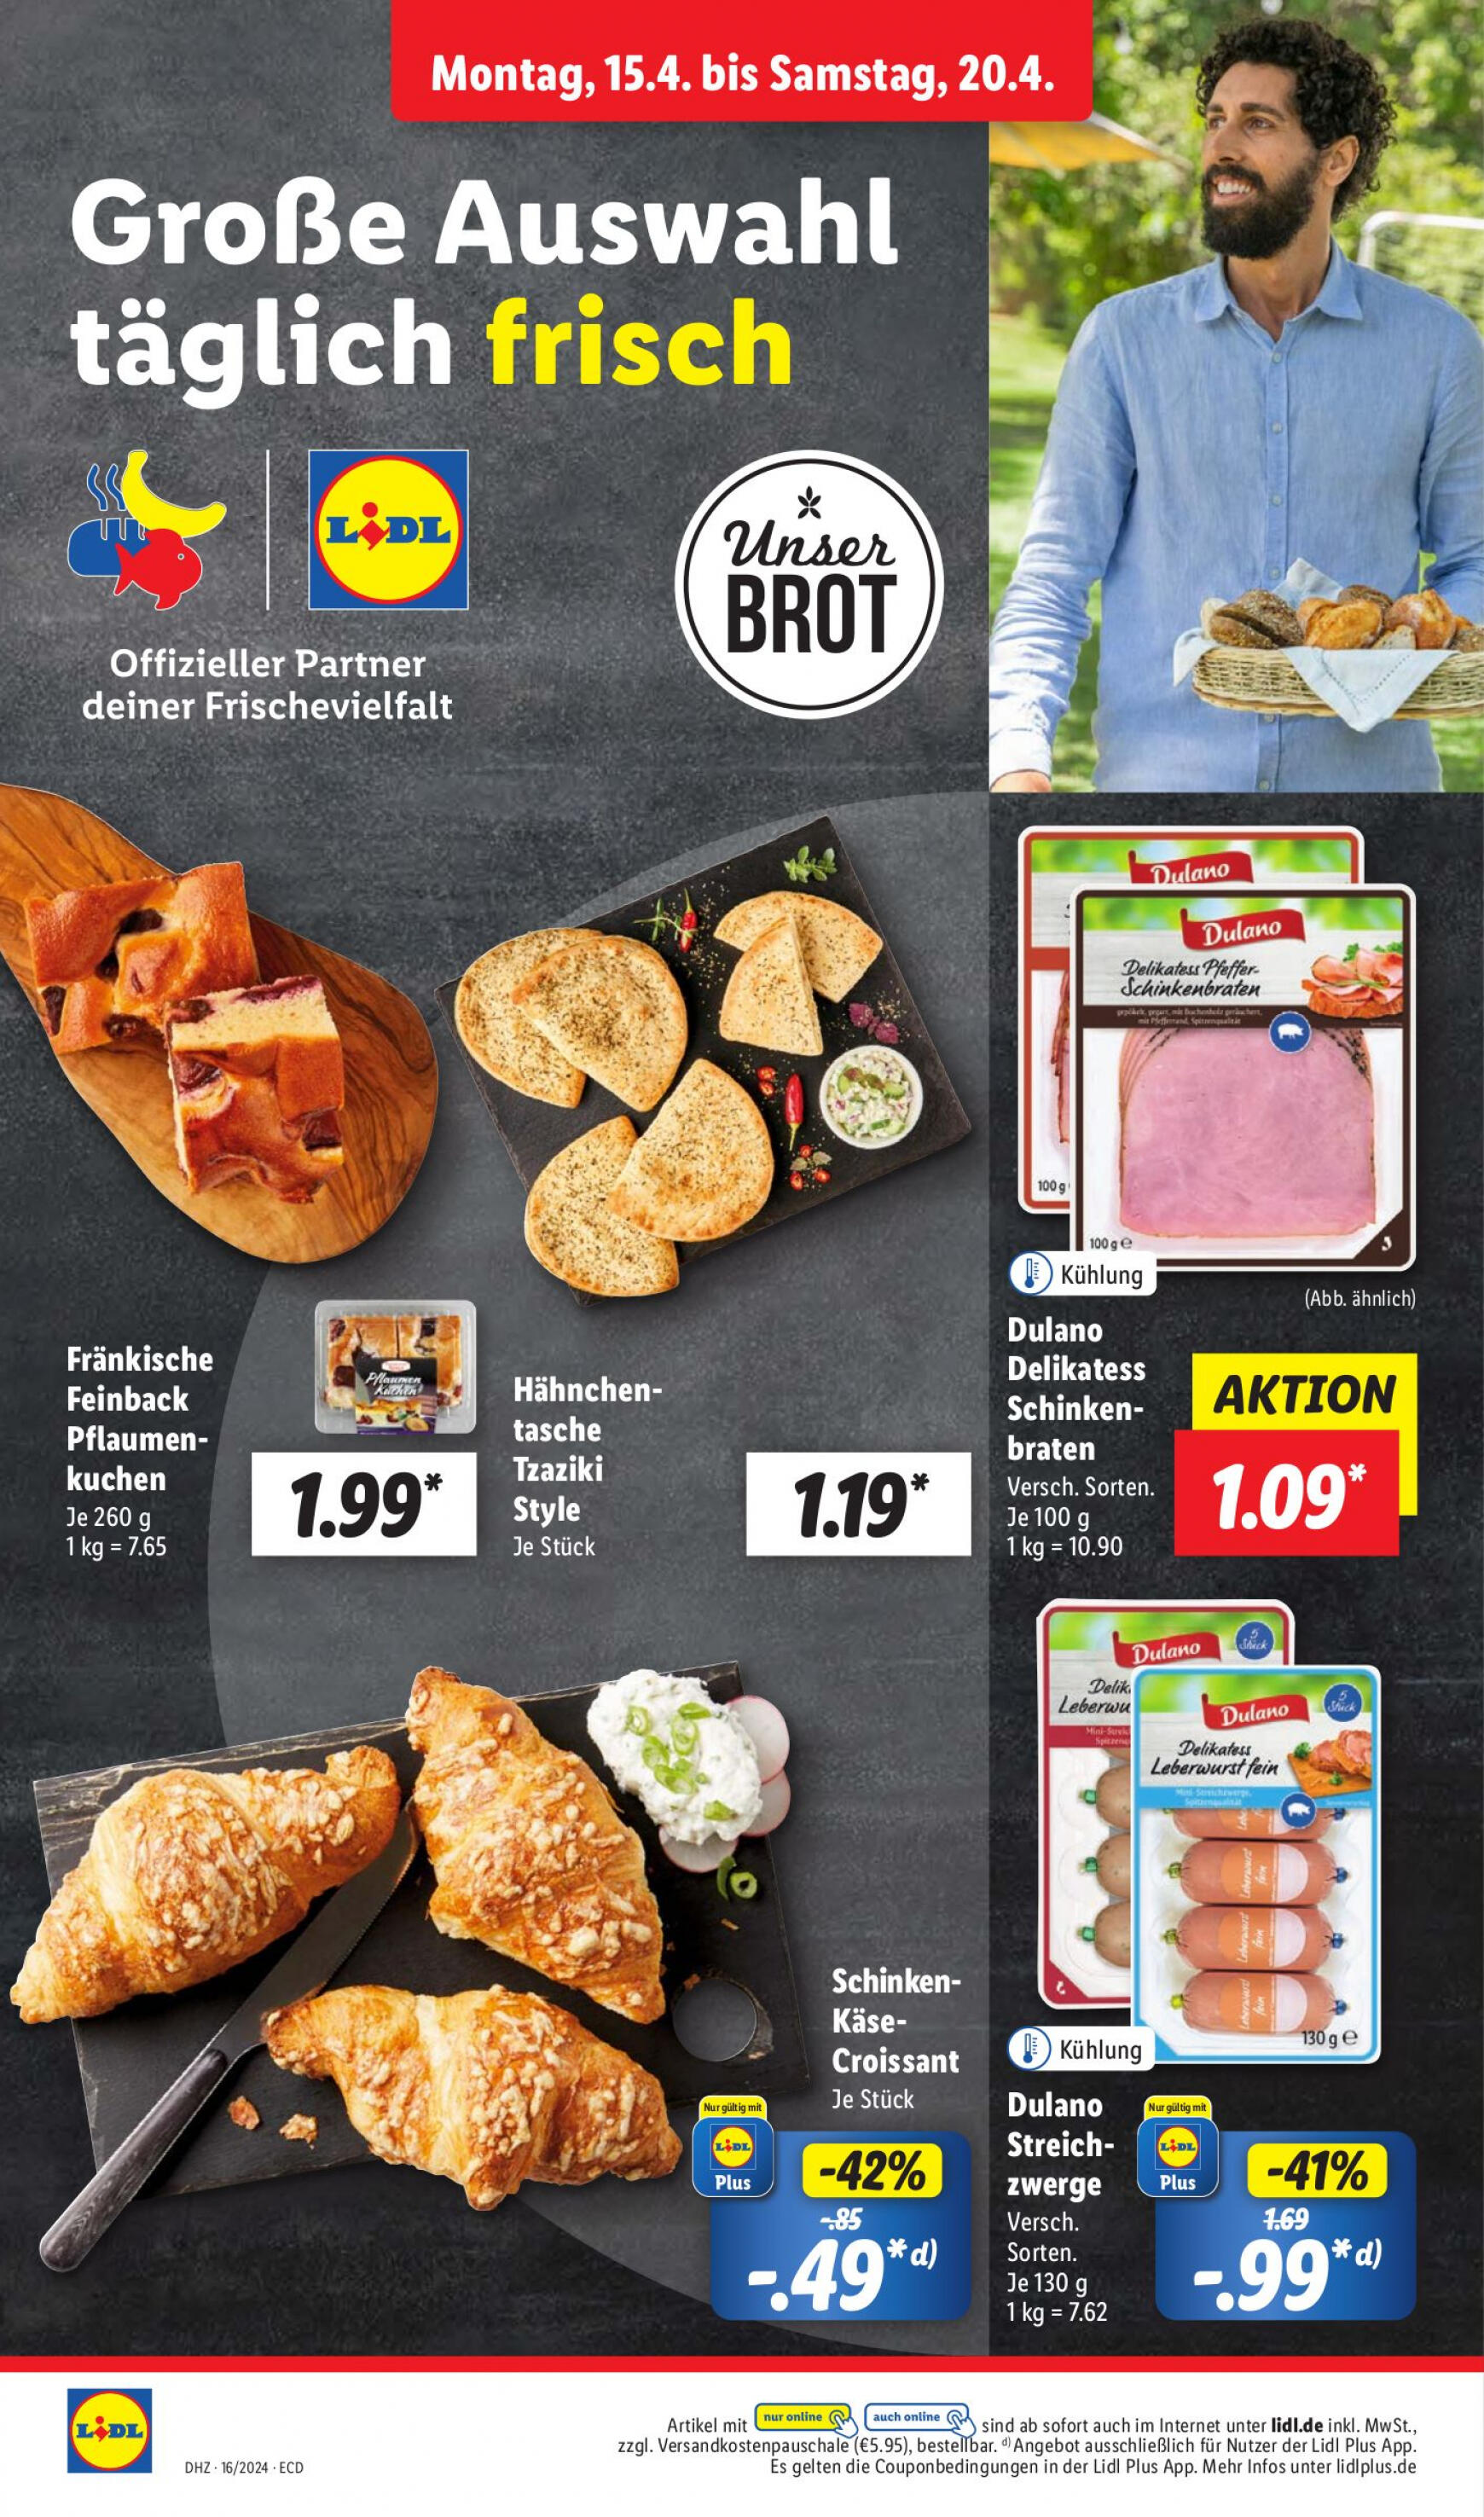 lidl - Flyer Lidl aktuell 15.04. - 20.04. - page: 6